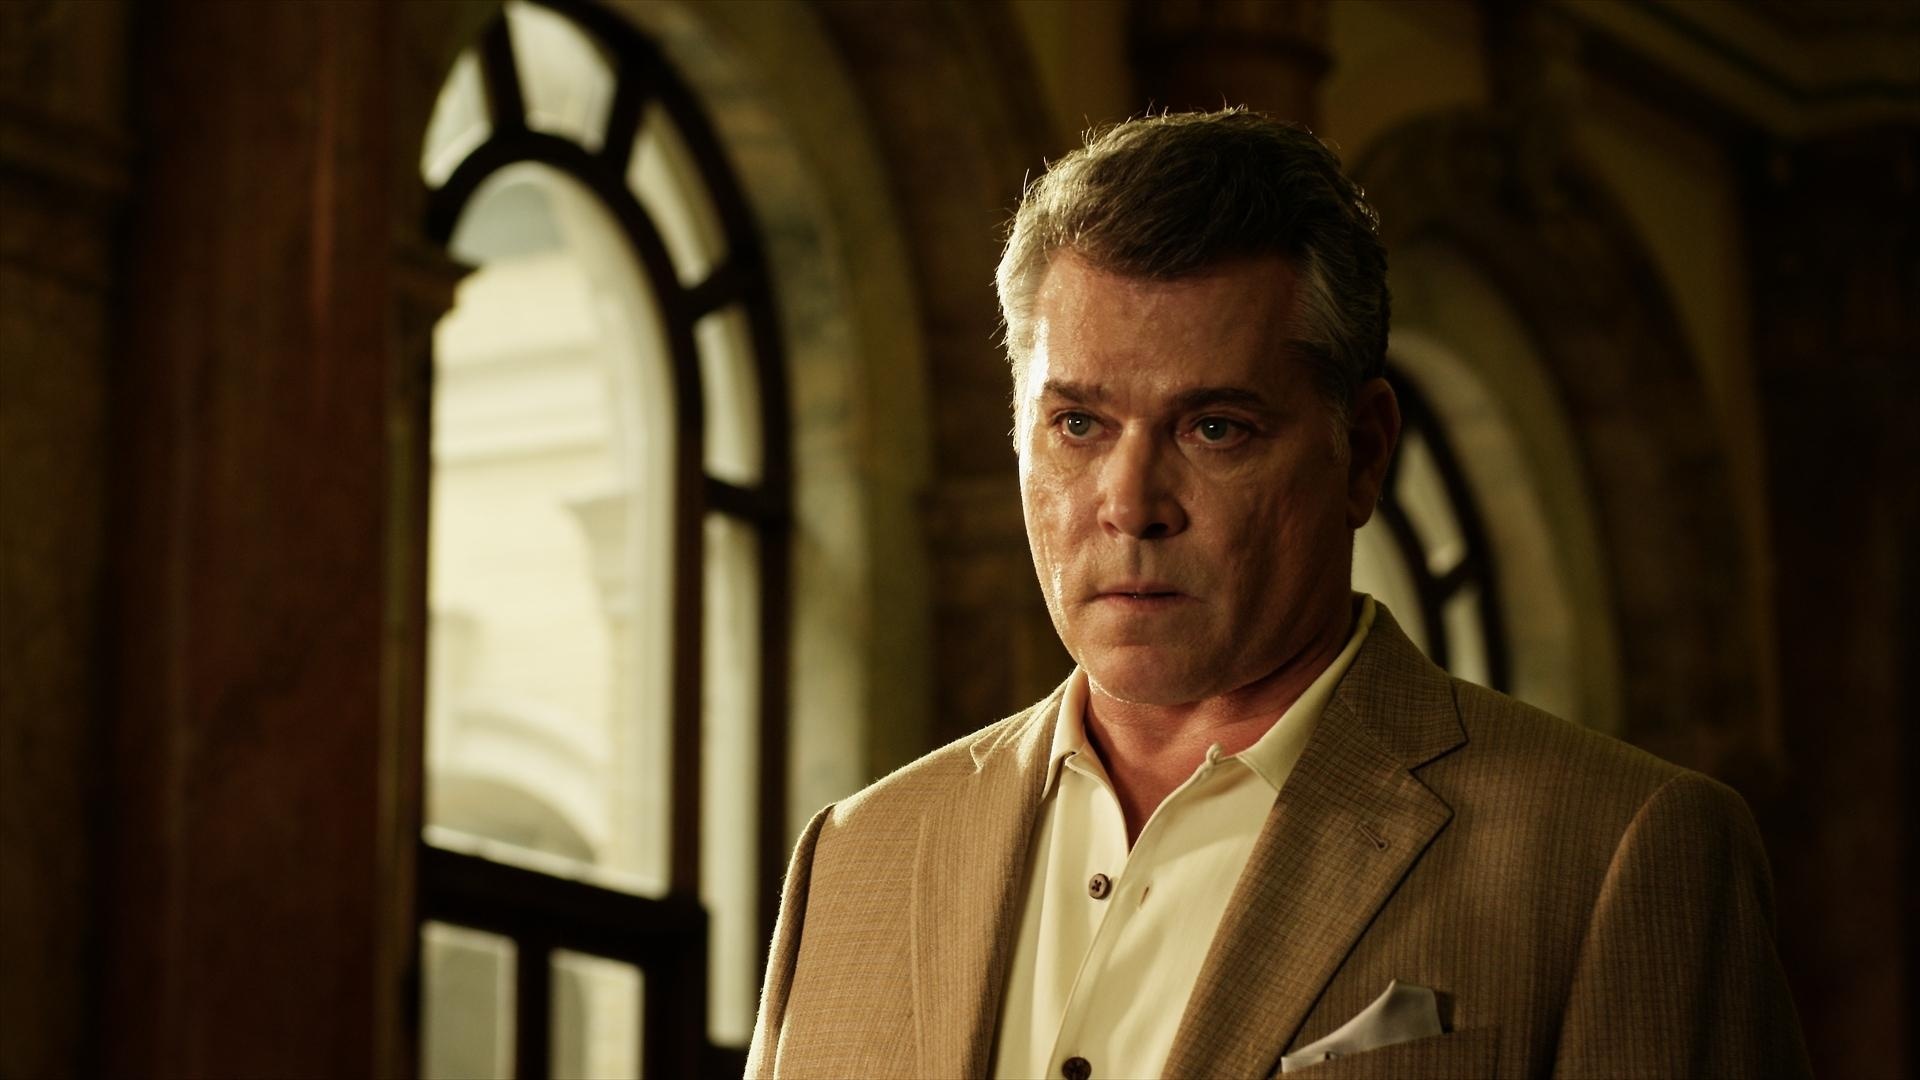 Ray Liotta: Played Detective Harrison in the 2009 Jody Hill comedy Observe and Report. 1920x1080 Full HD Wallpaper.